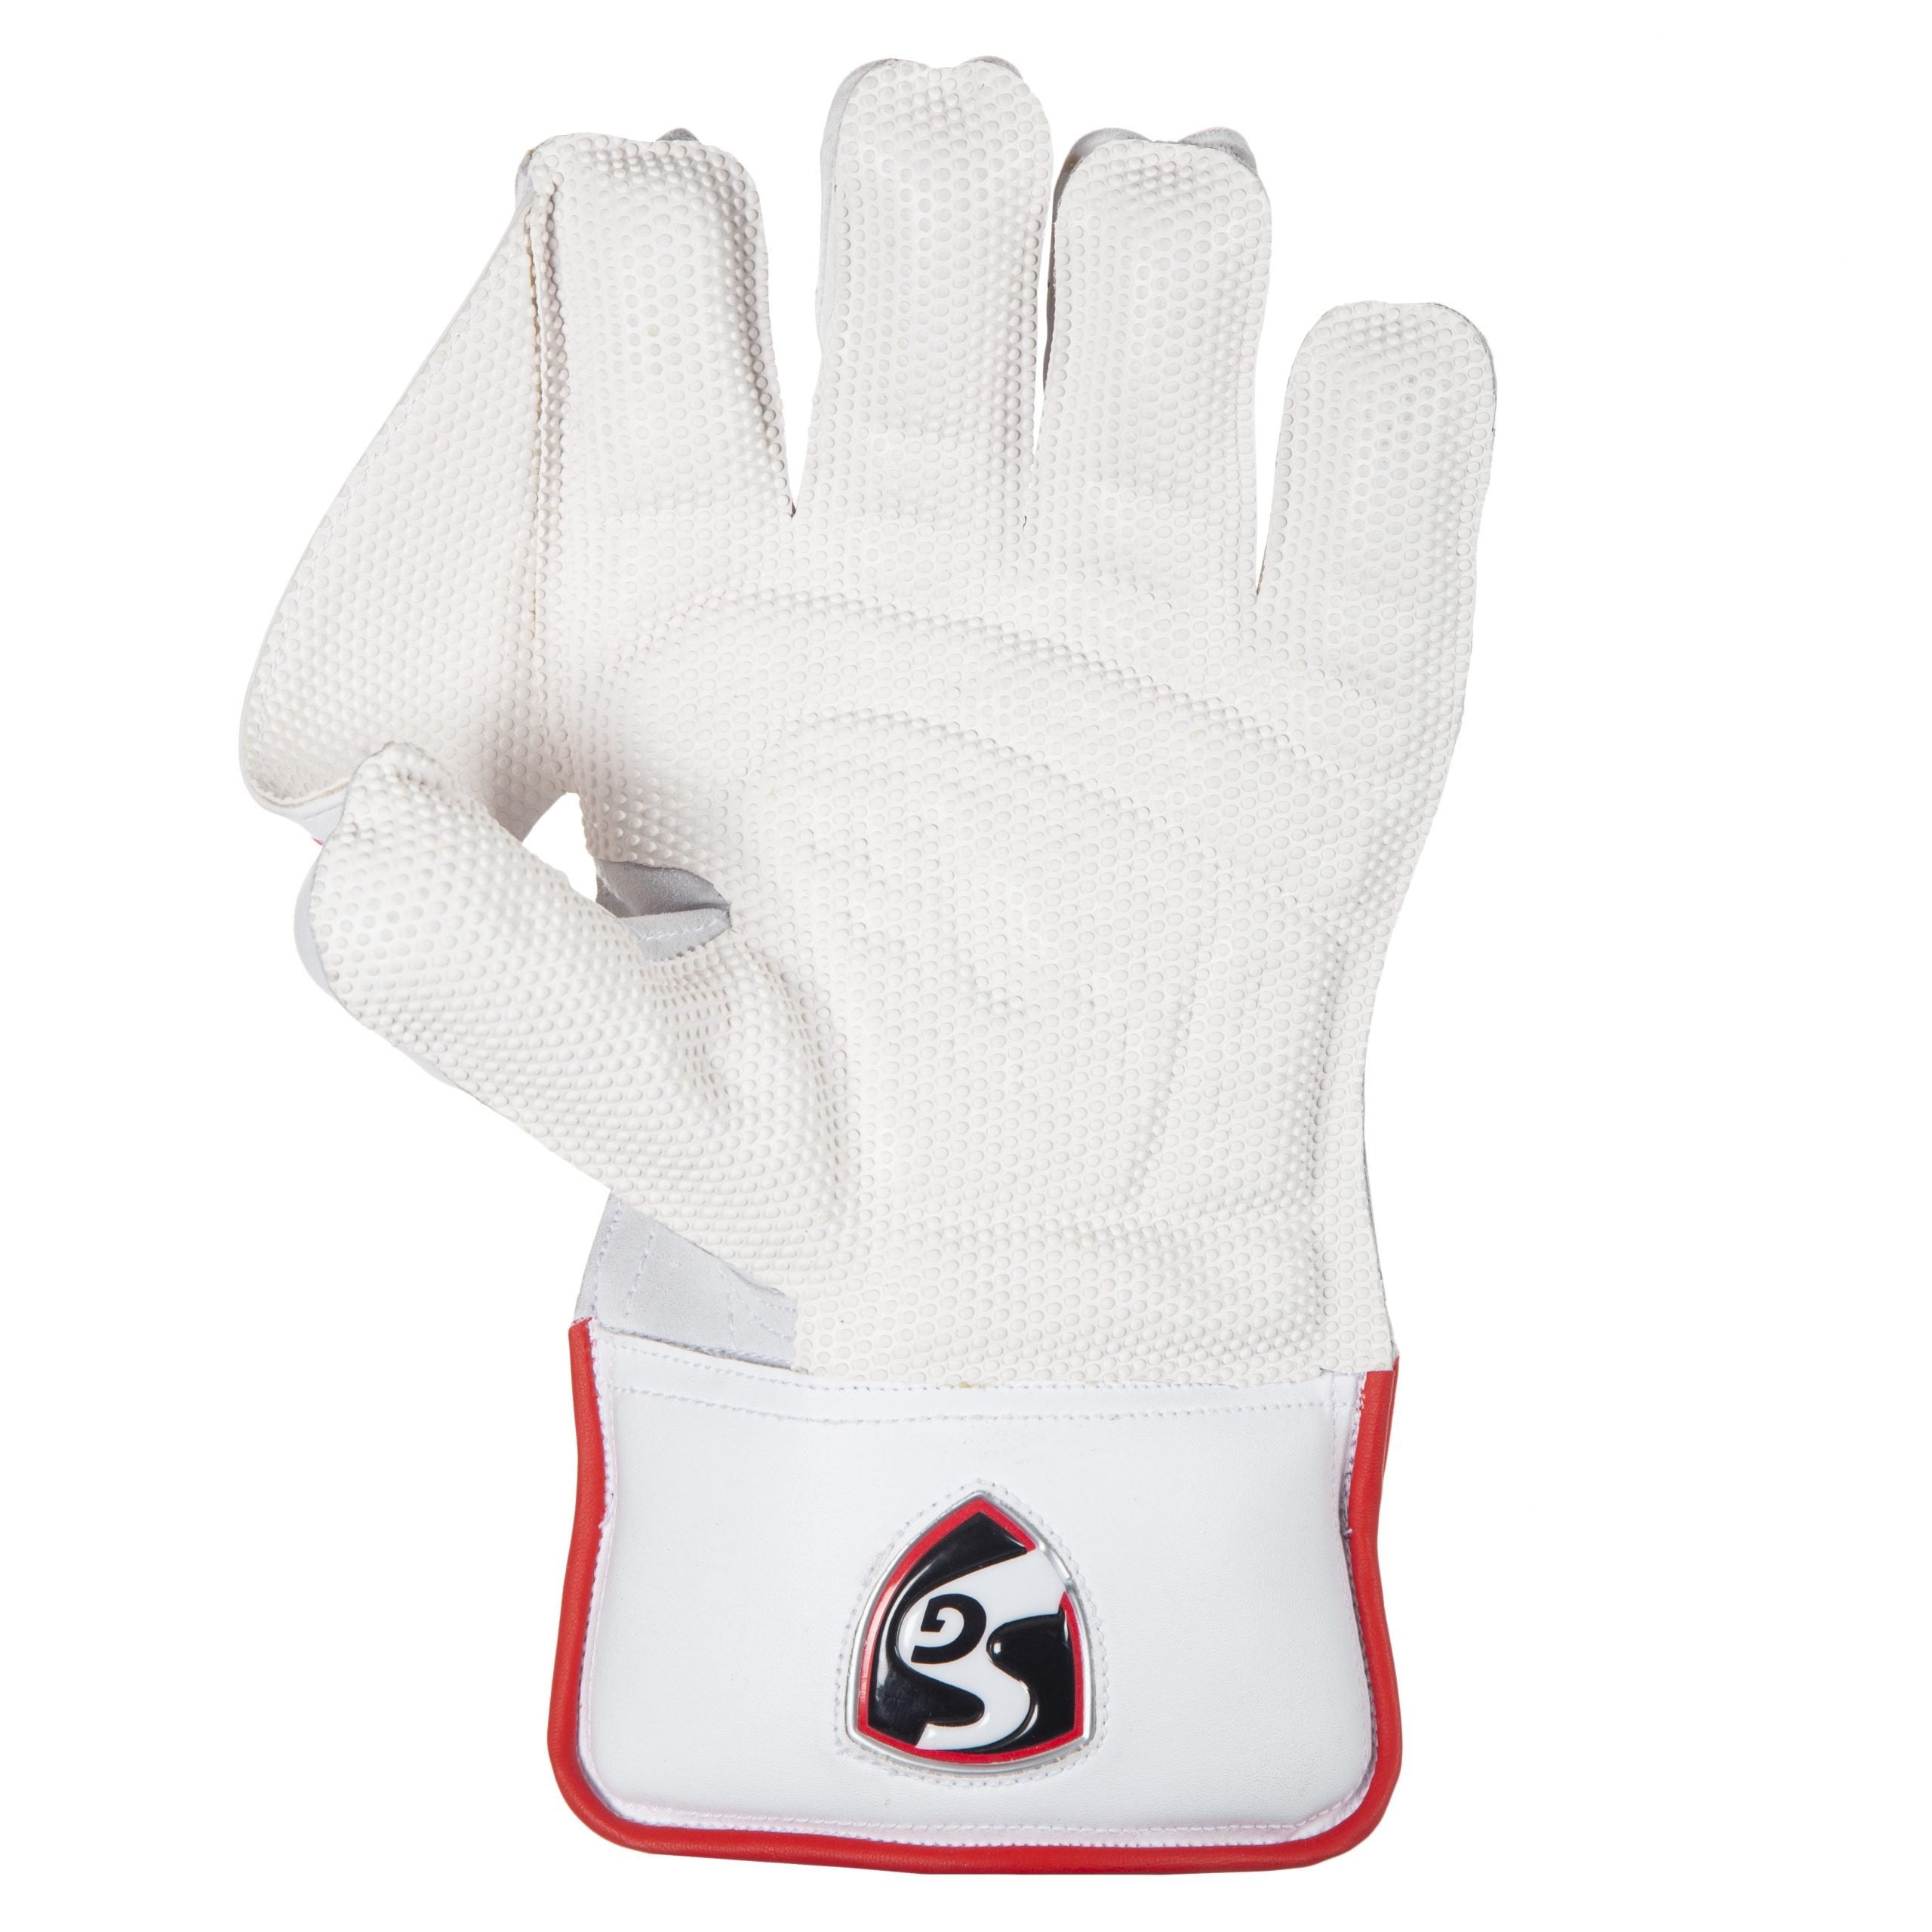 Shop Now SG Keeping Gloves